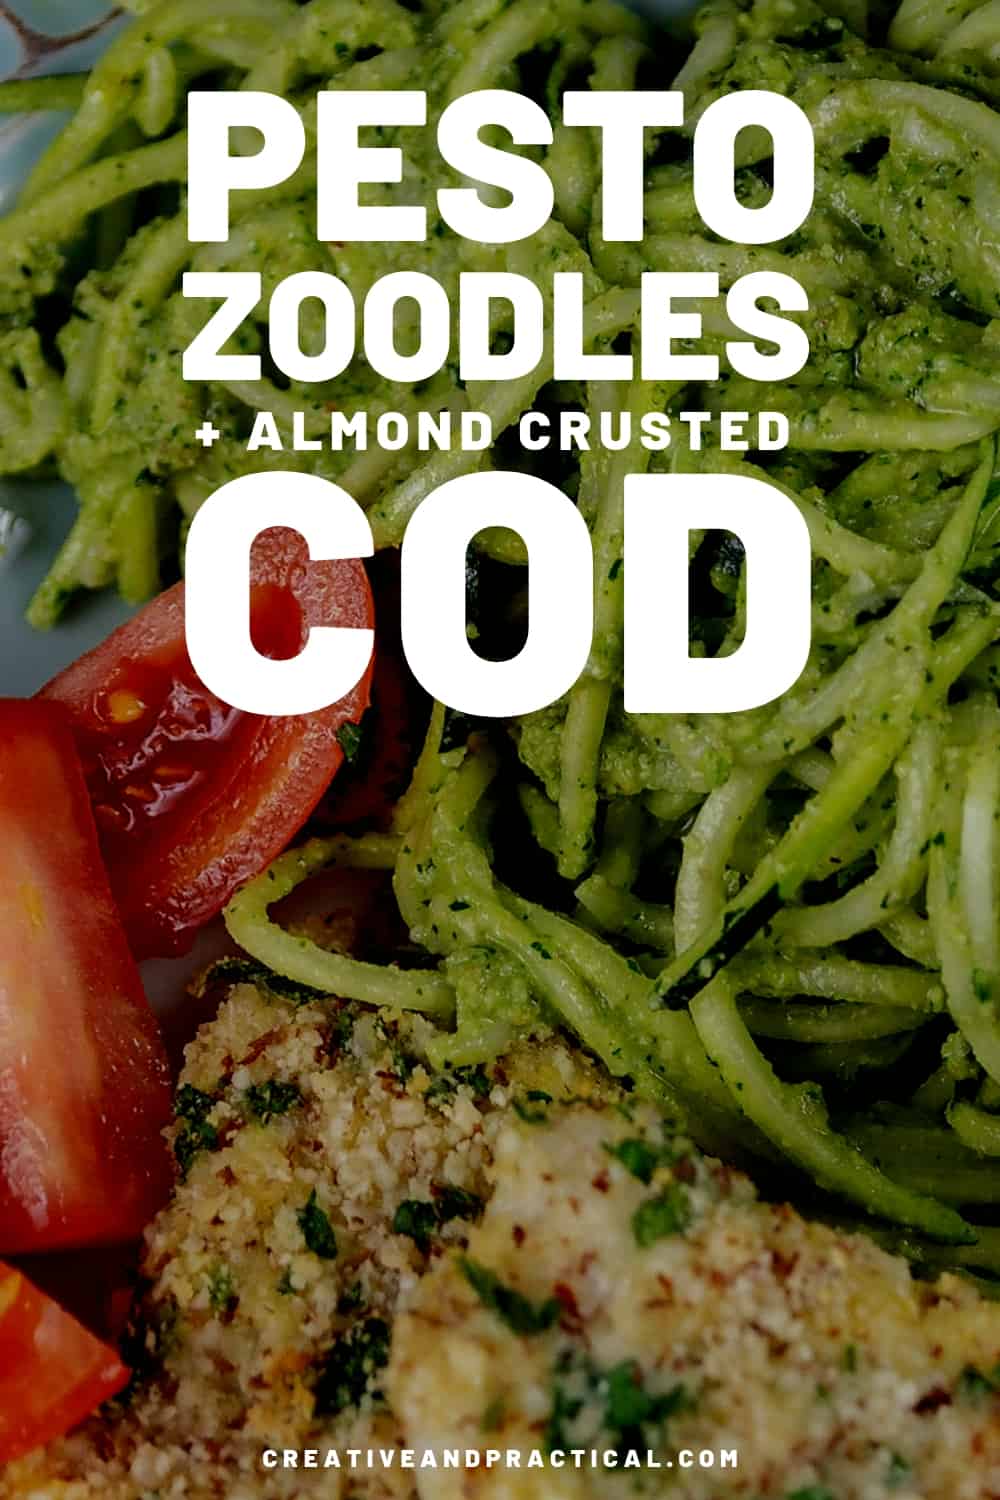 Pesto Zoodles are such an easy and delicious alternative to traditional pasta. Serving the zucchini noodles with almond crusted cod (tilapia would work, too) make this recipe a perfect gluten free dinner. #glutenfree #zoodles #nowheat #healthyliving #cod #pesto #zucchininoodles  ♡ cheerfulcook.com
 via @cheerfulcook